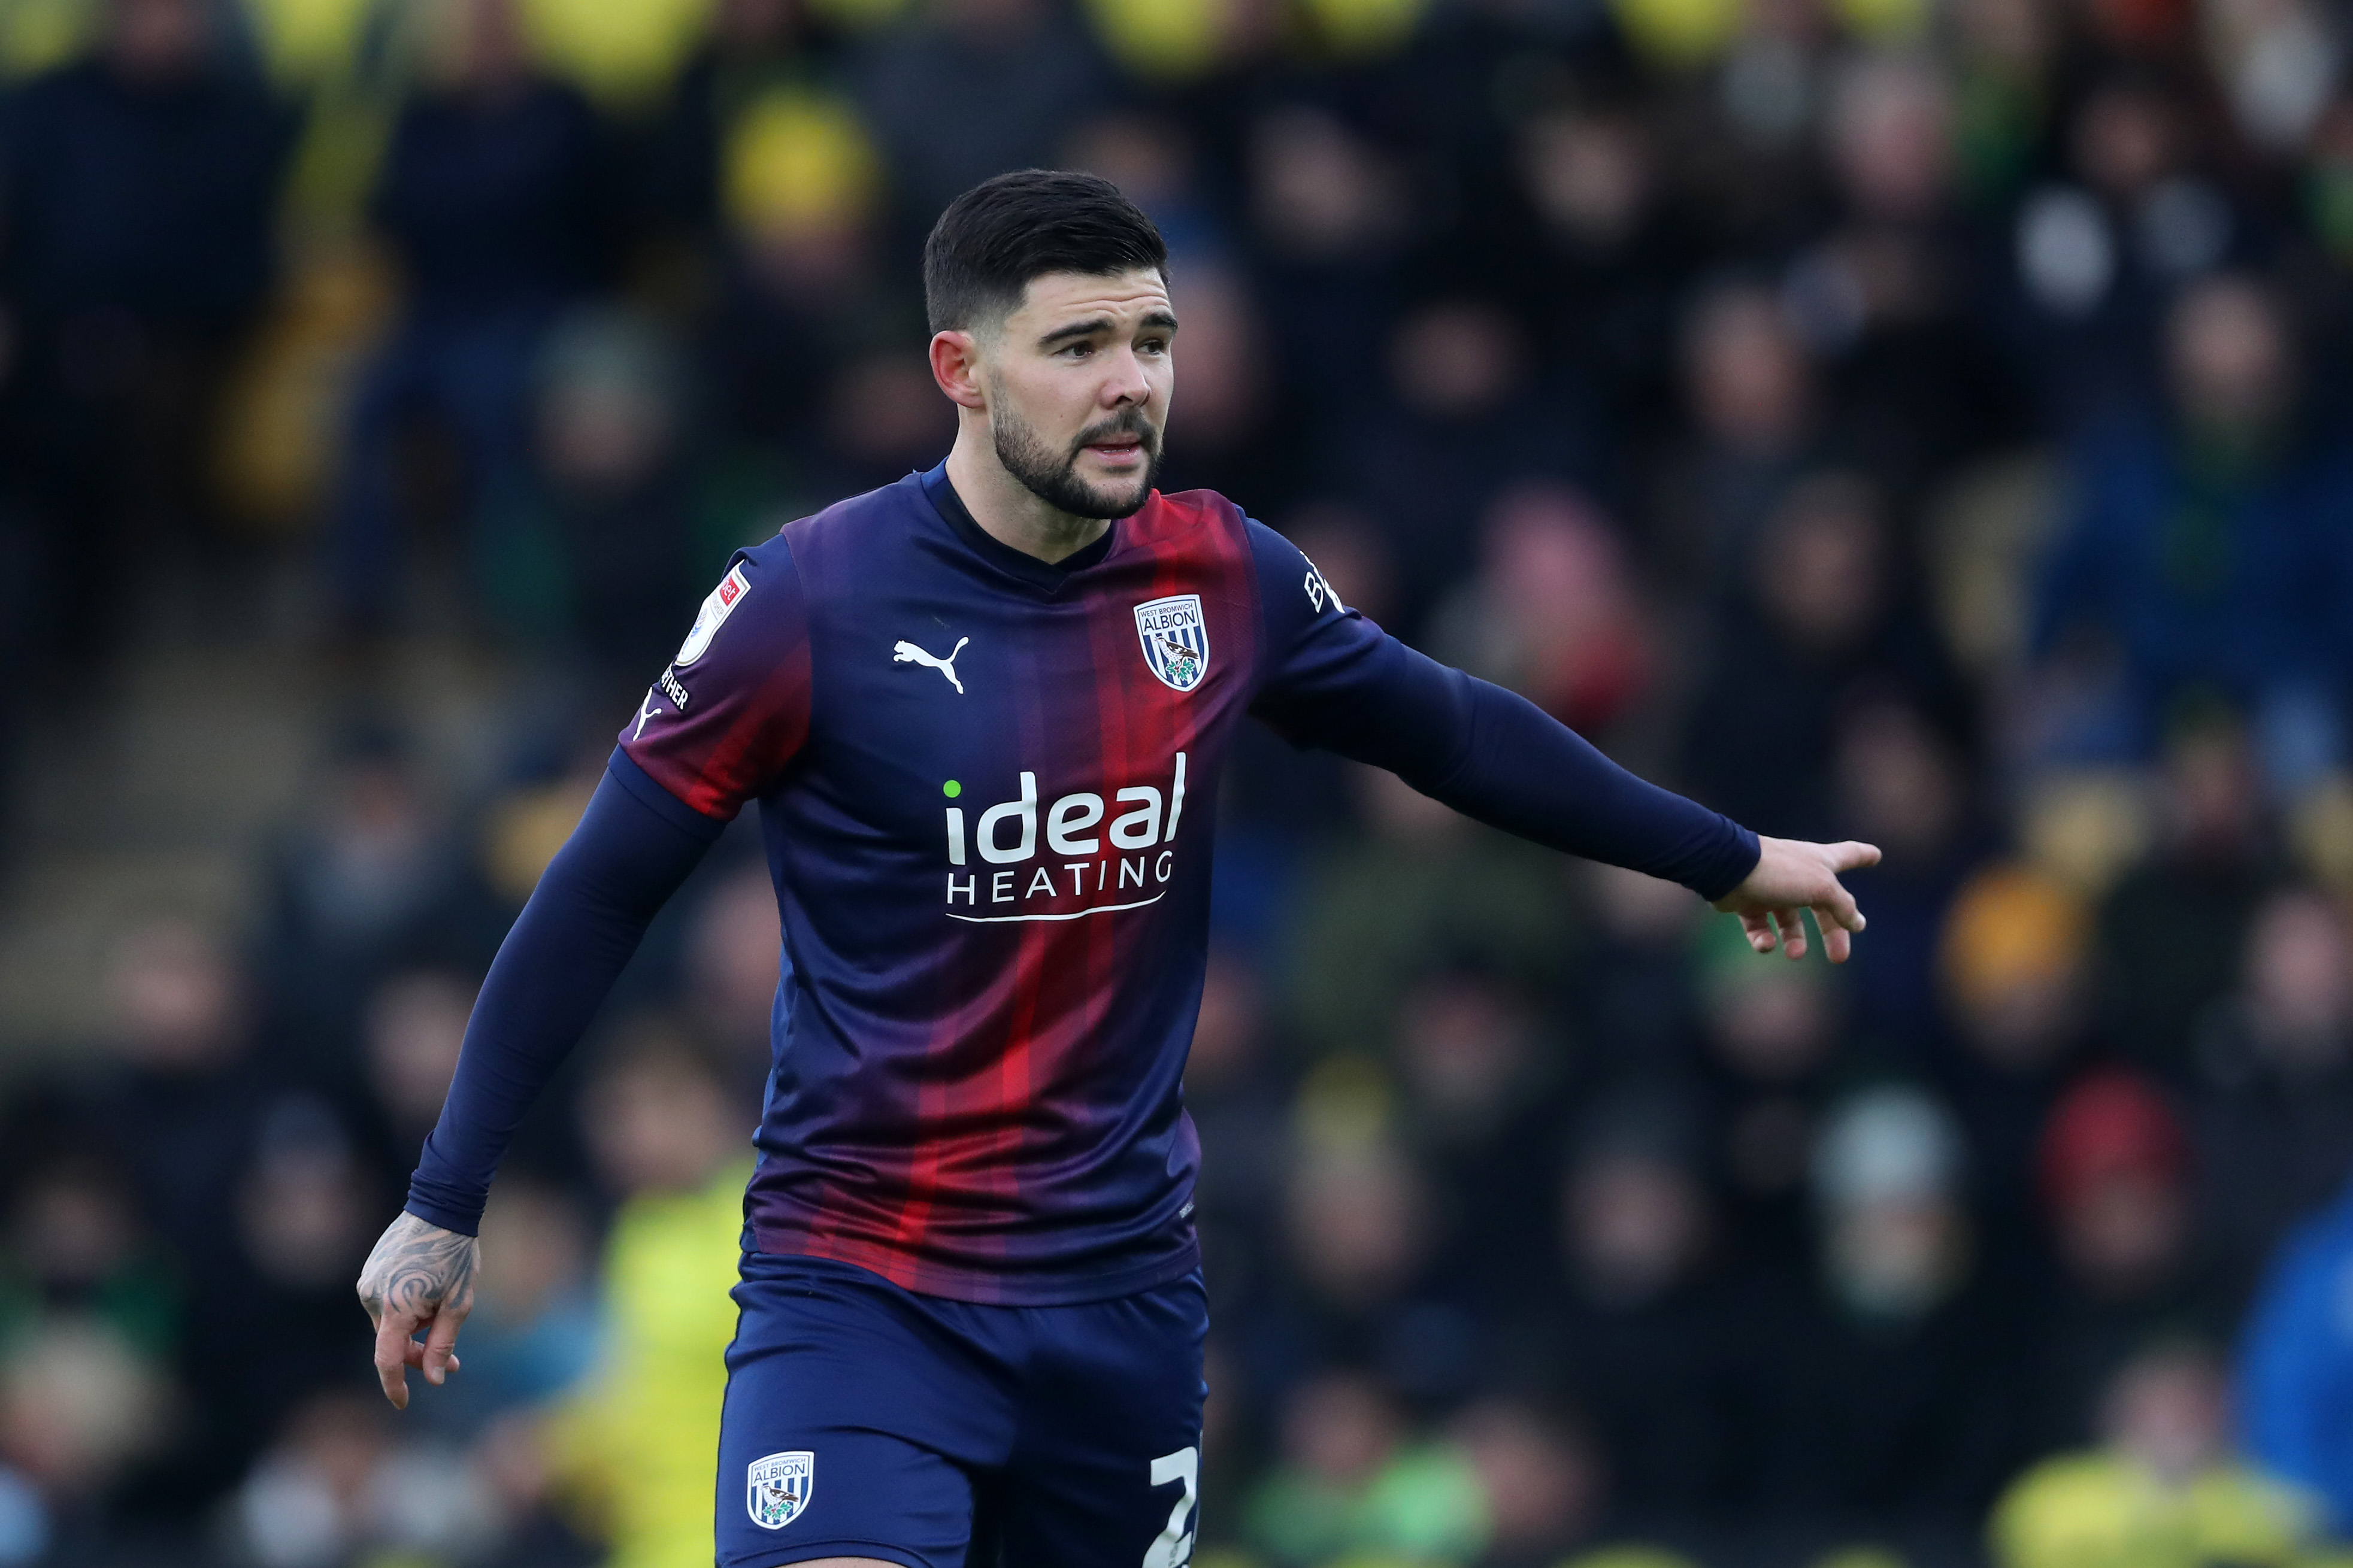 Alex Mowatt wearing Albion's navy-blue-and-red away kit at Norwich City